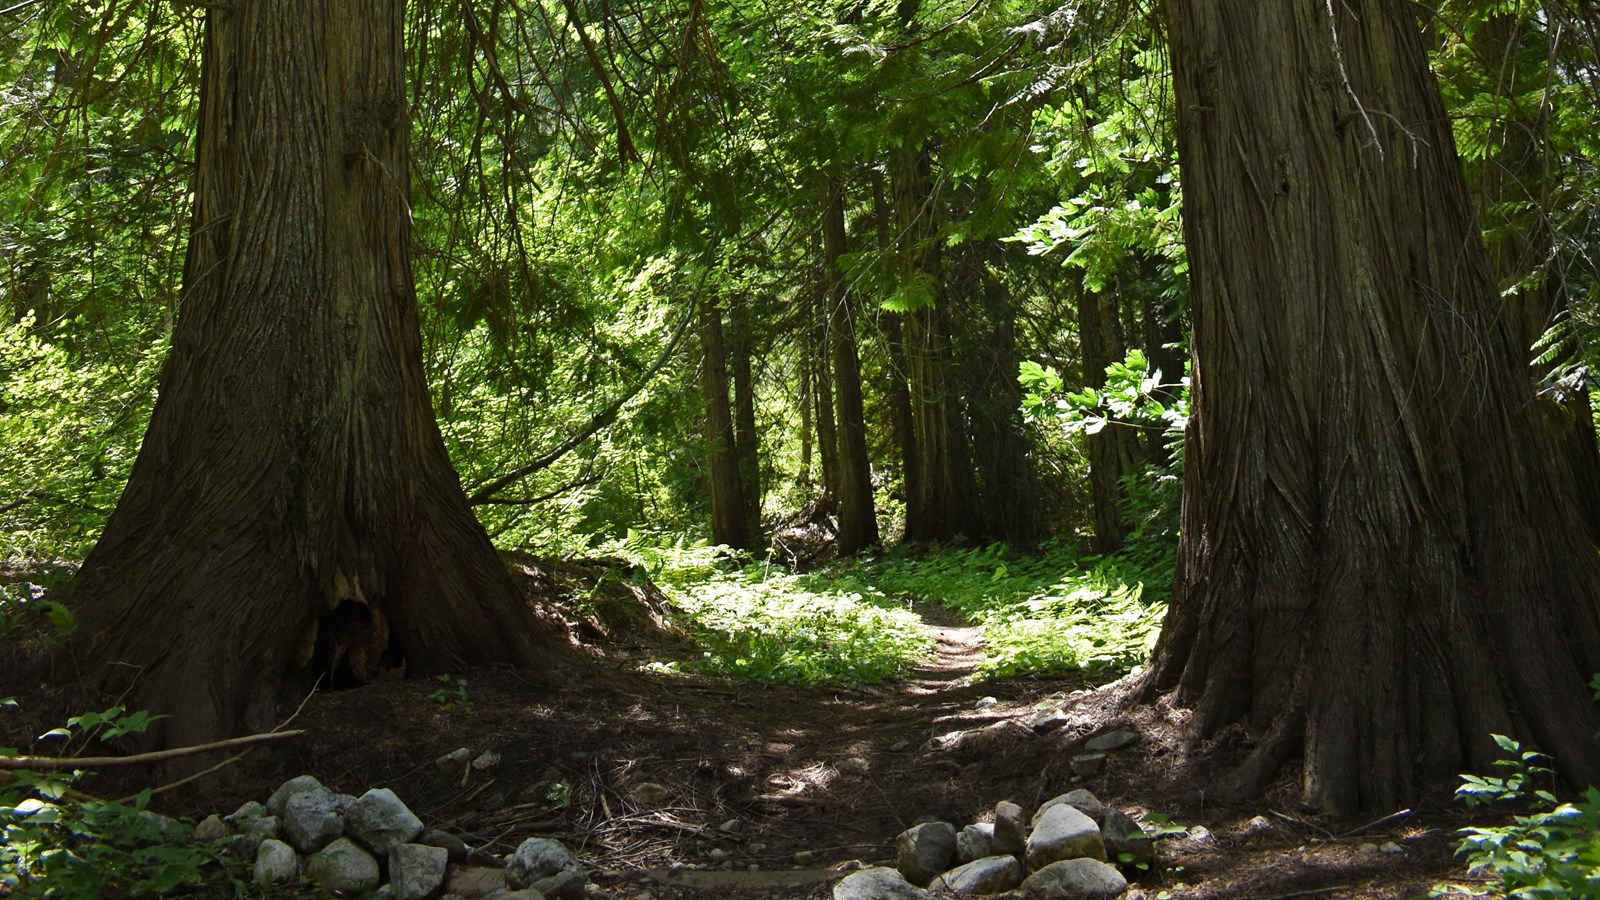 Large cedar trees make up a sunny forest where a thin dirt path winds.